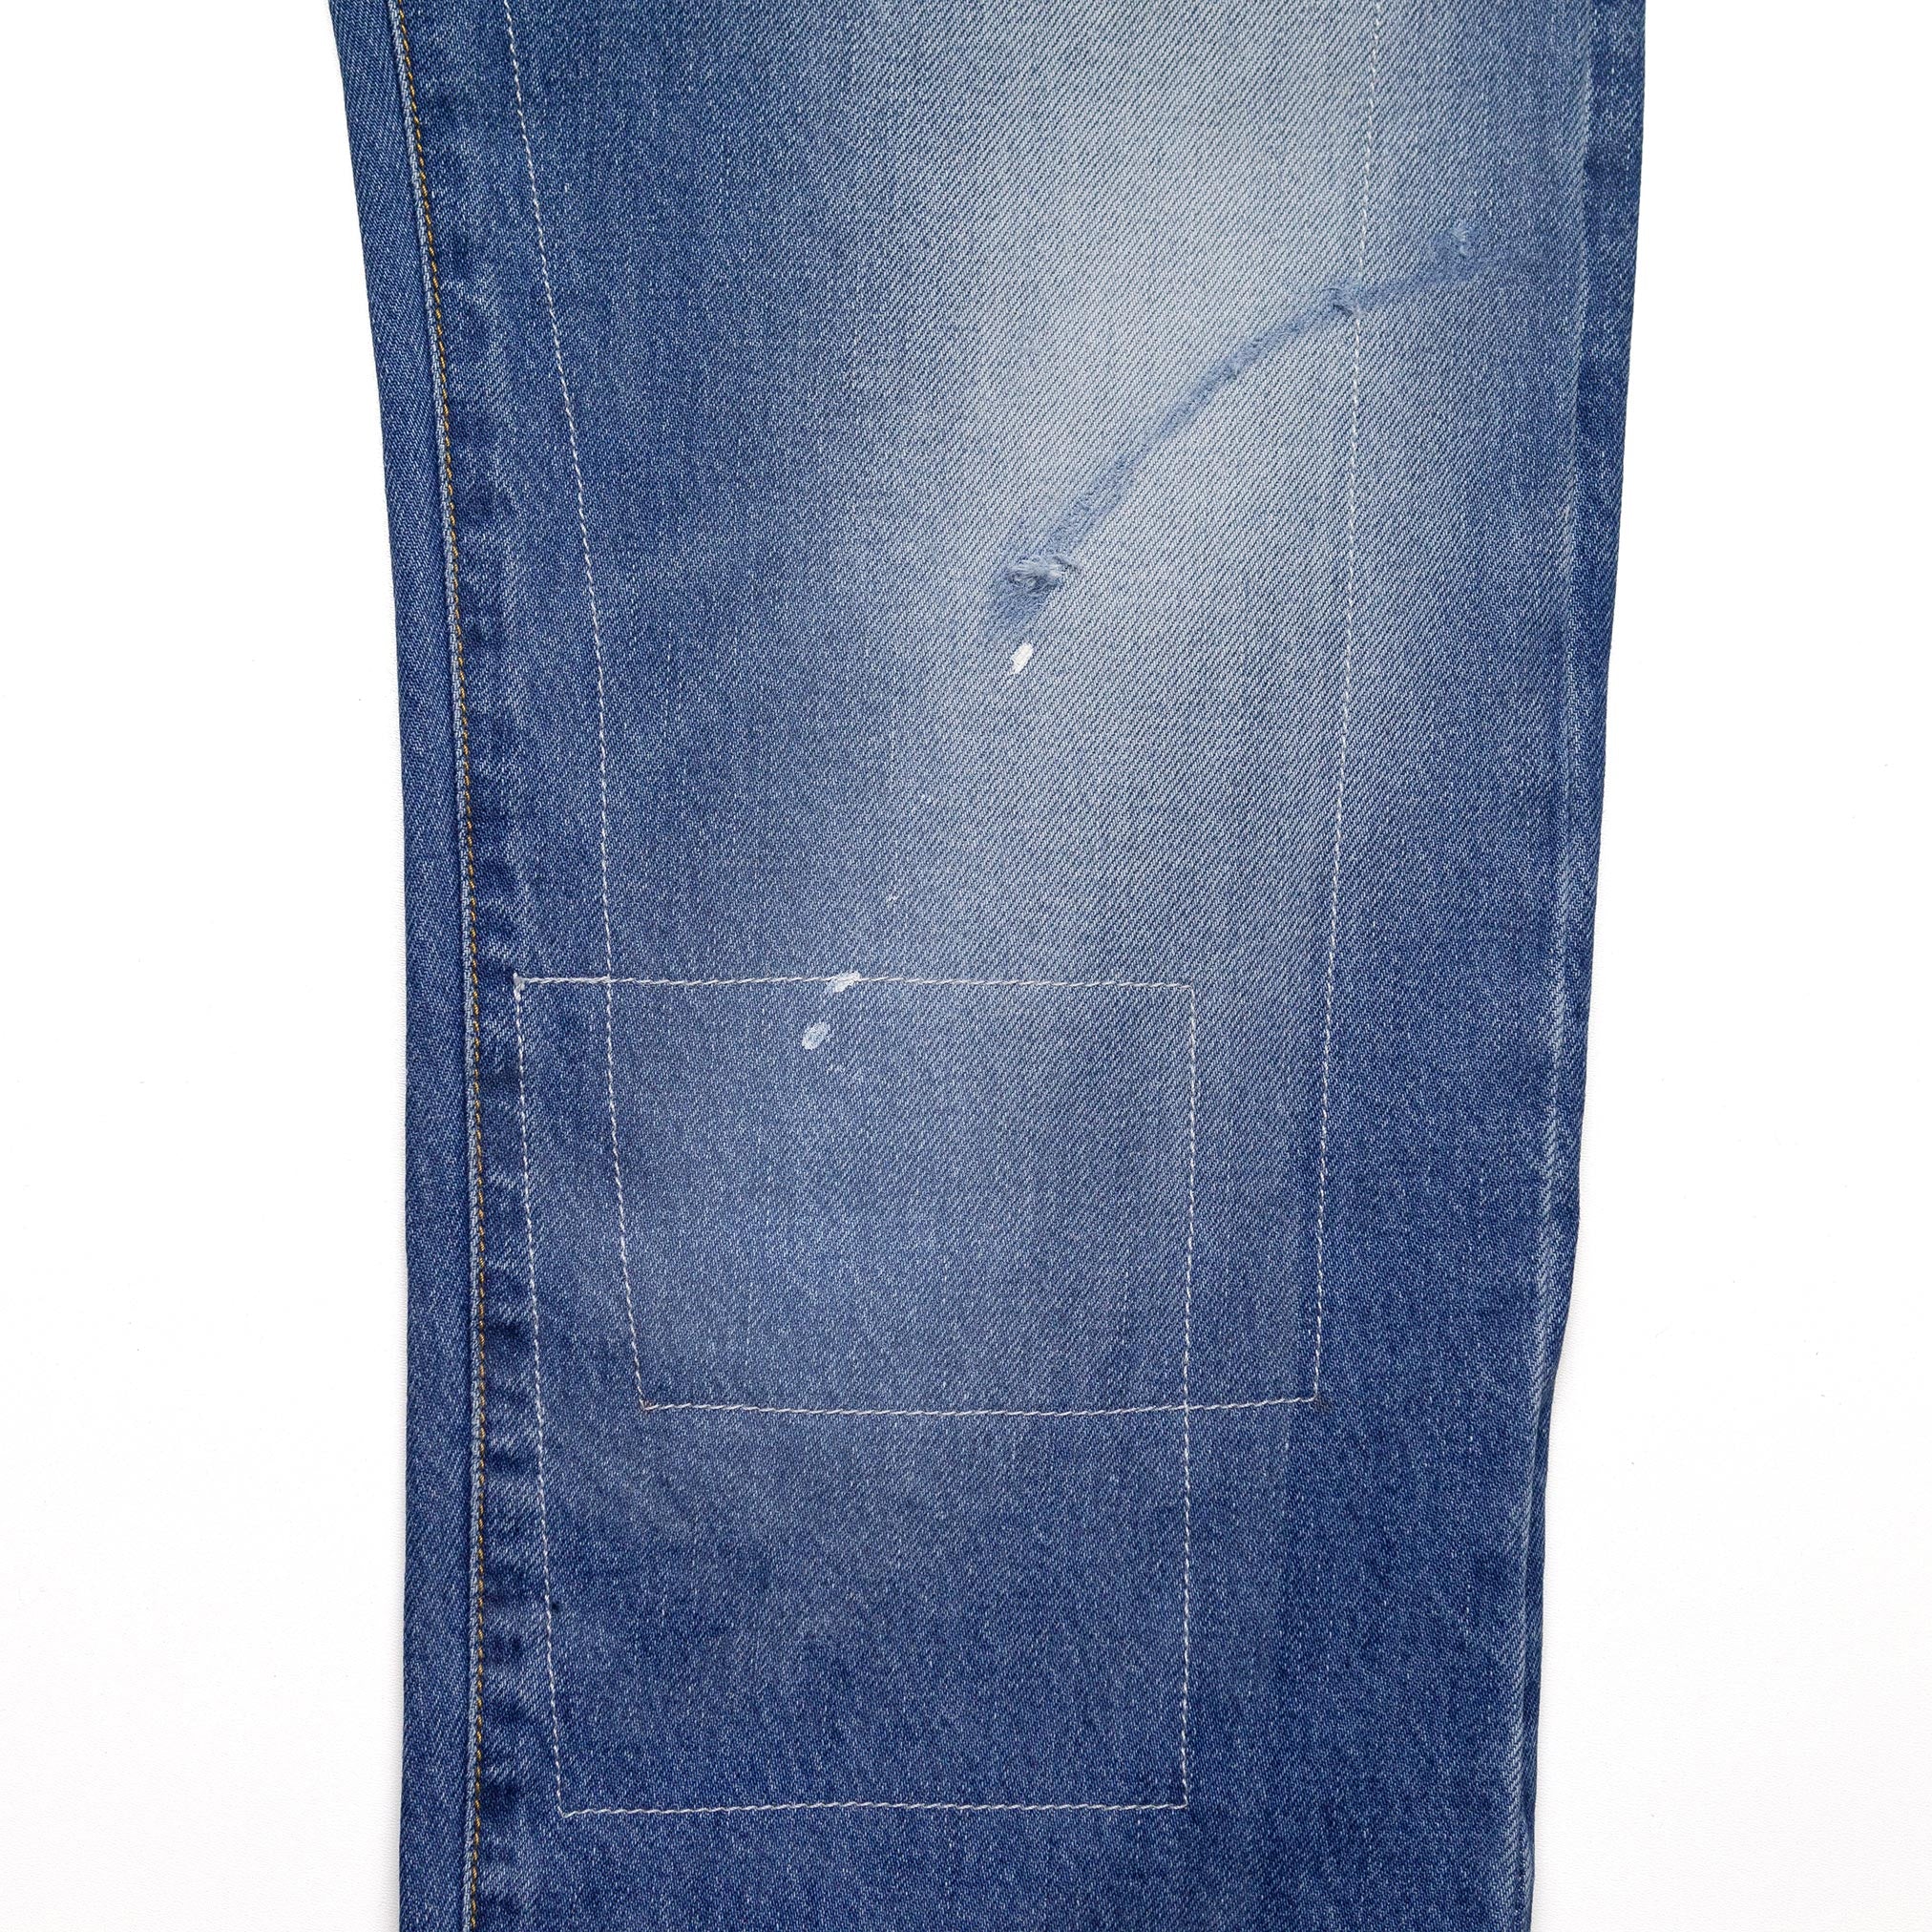 Crug 234 Patch Jeans